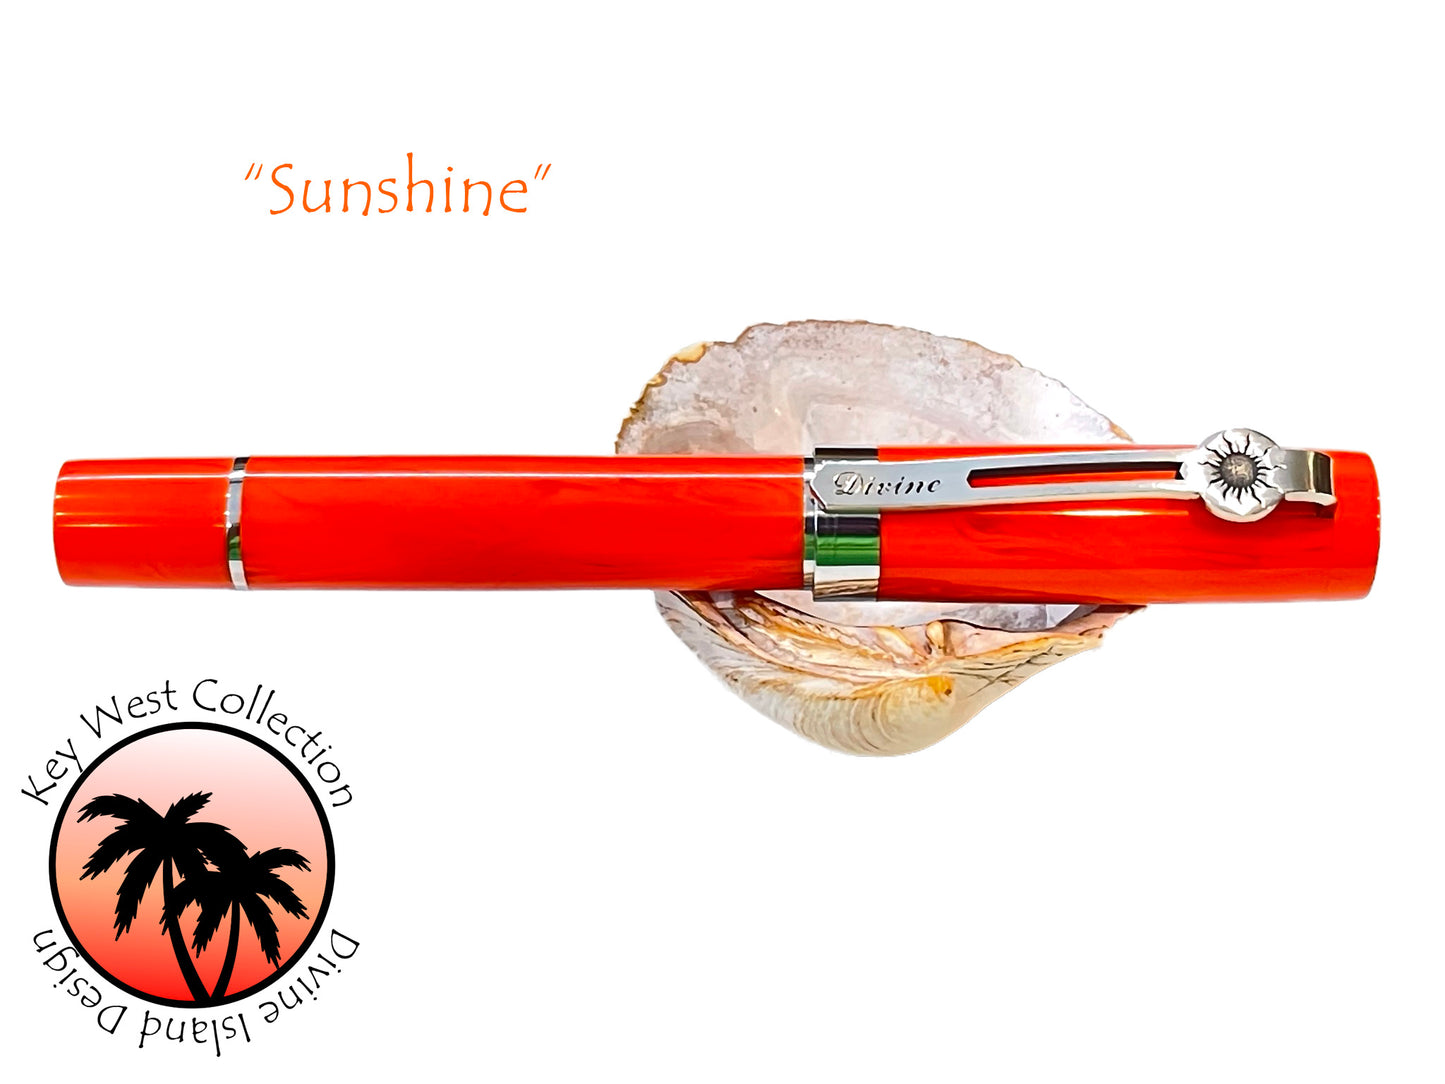 Key West Collection Fountain Pen - "Sunshine"